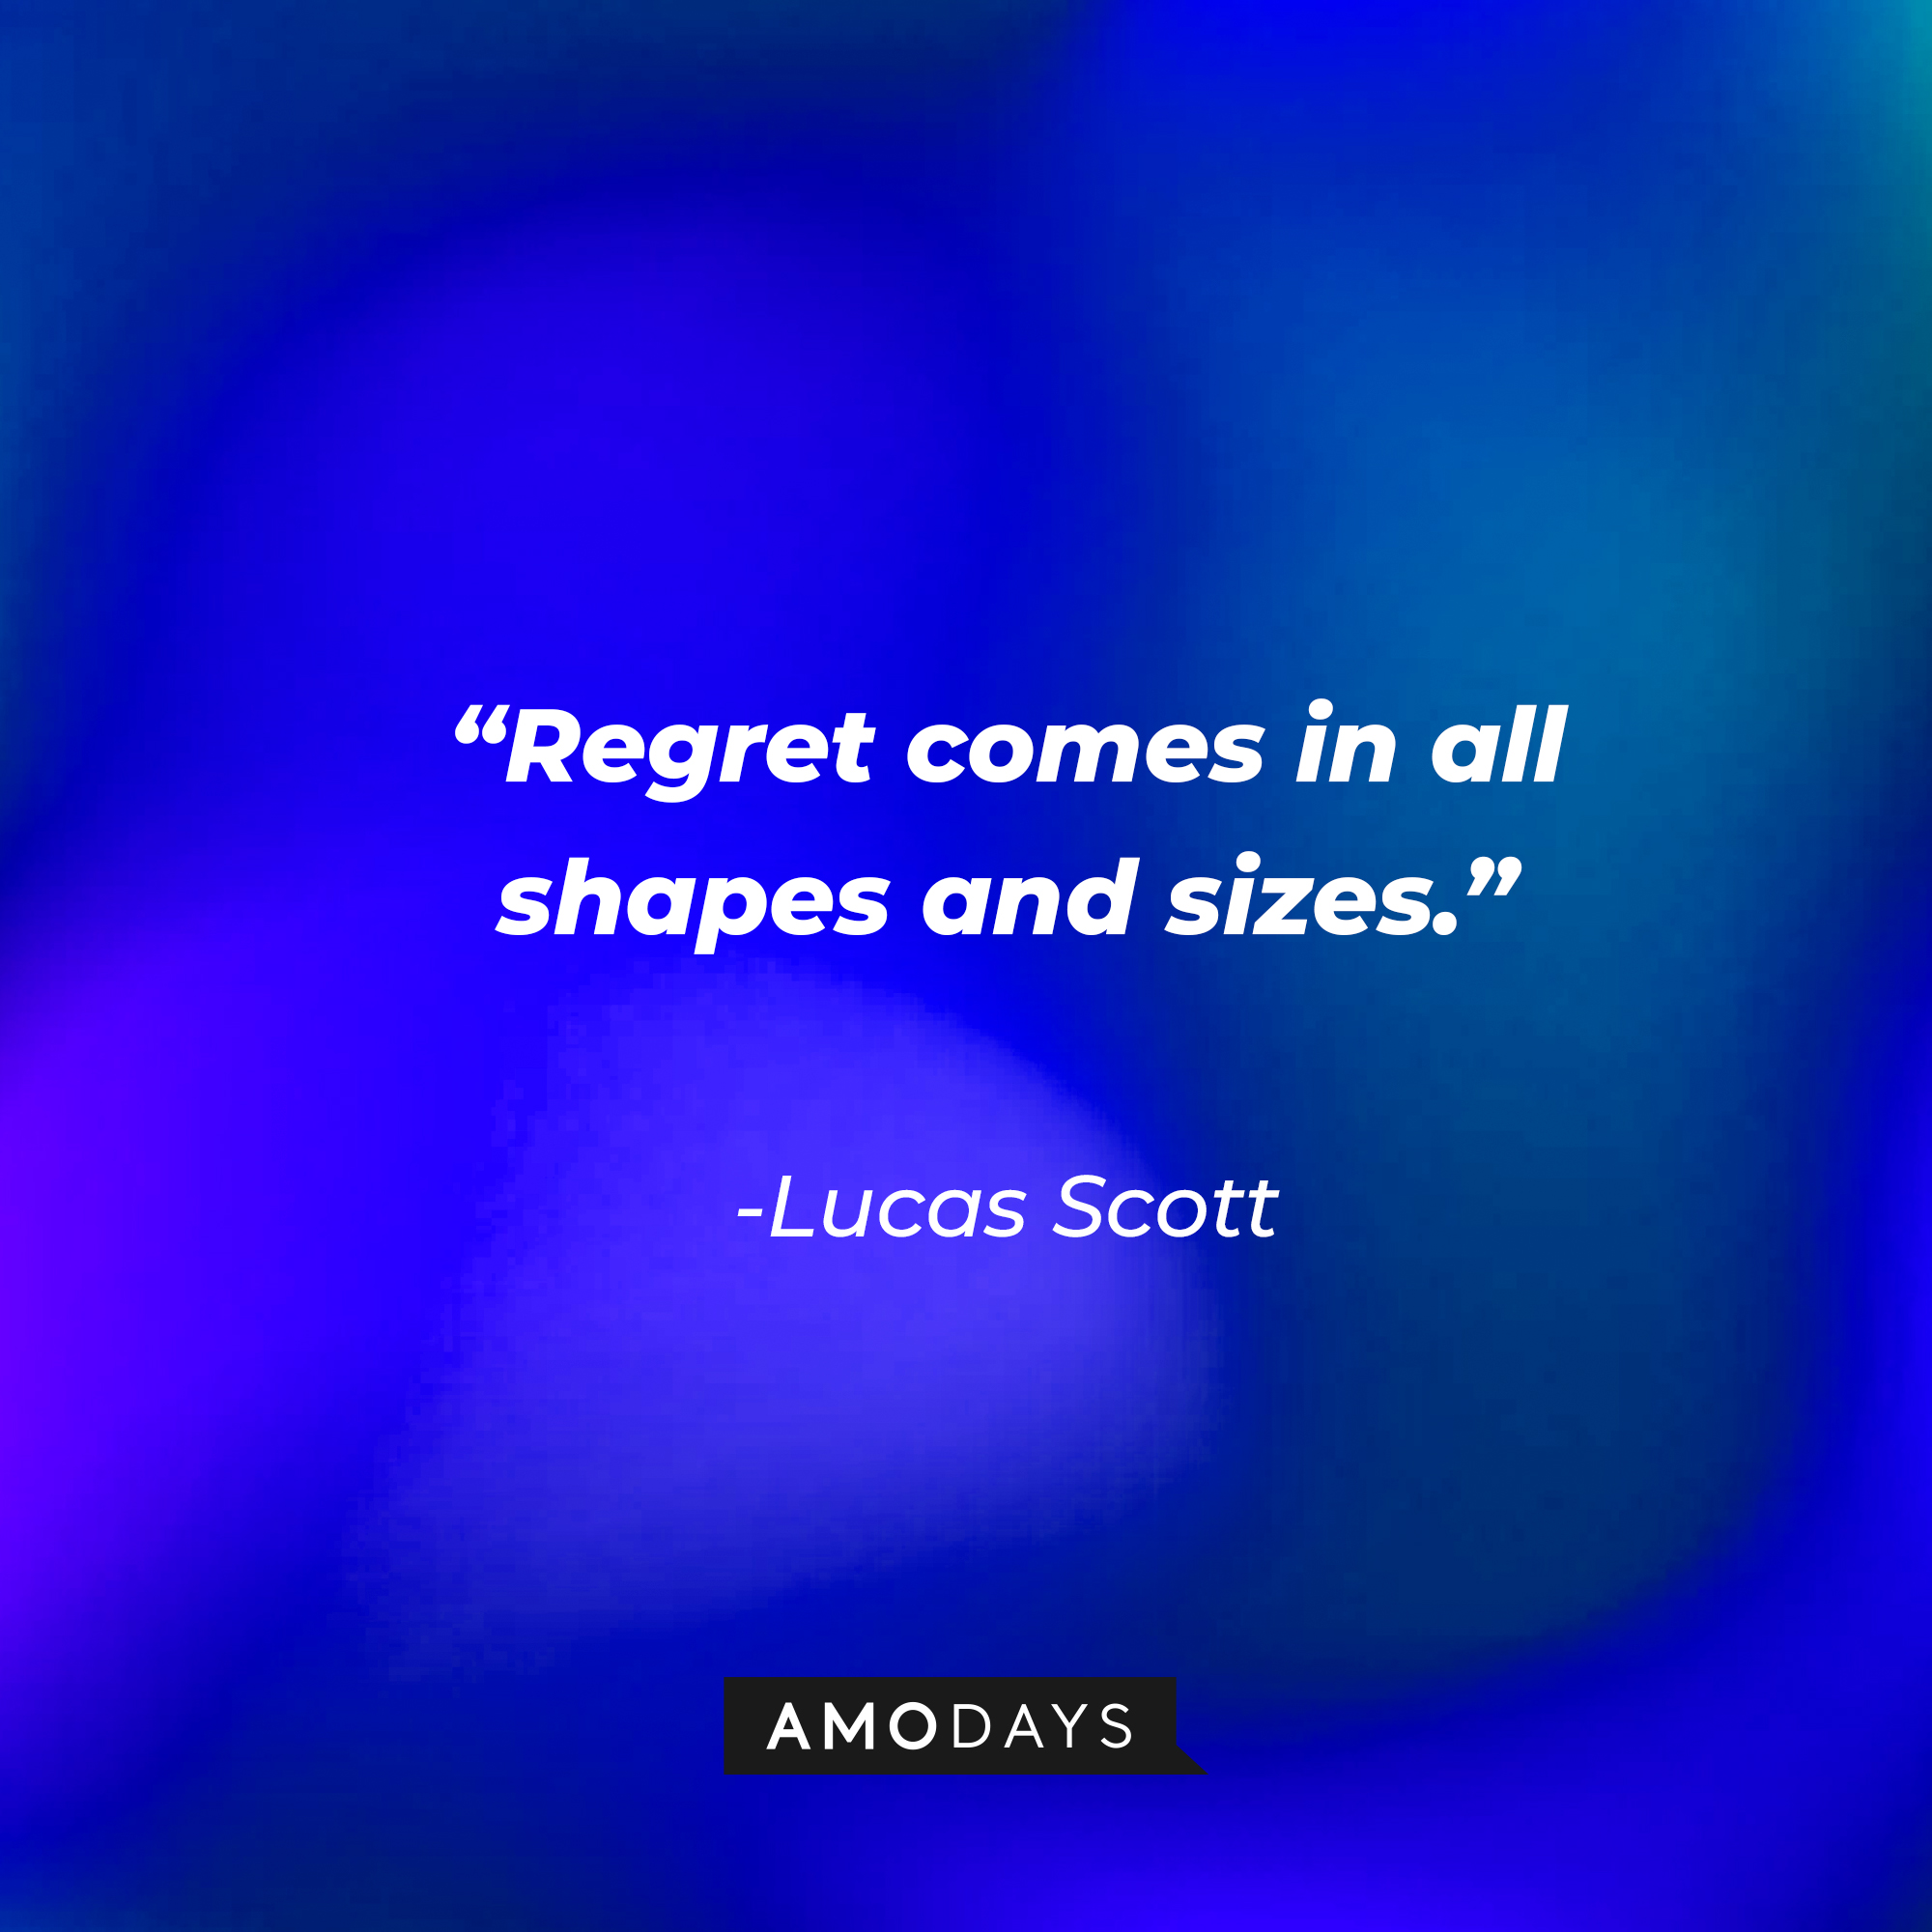 Lucas Scott’s quote: “Regret comes in all shapes and sizes." | Source:  AmoDays